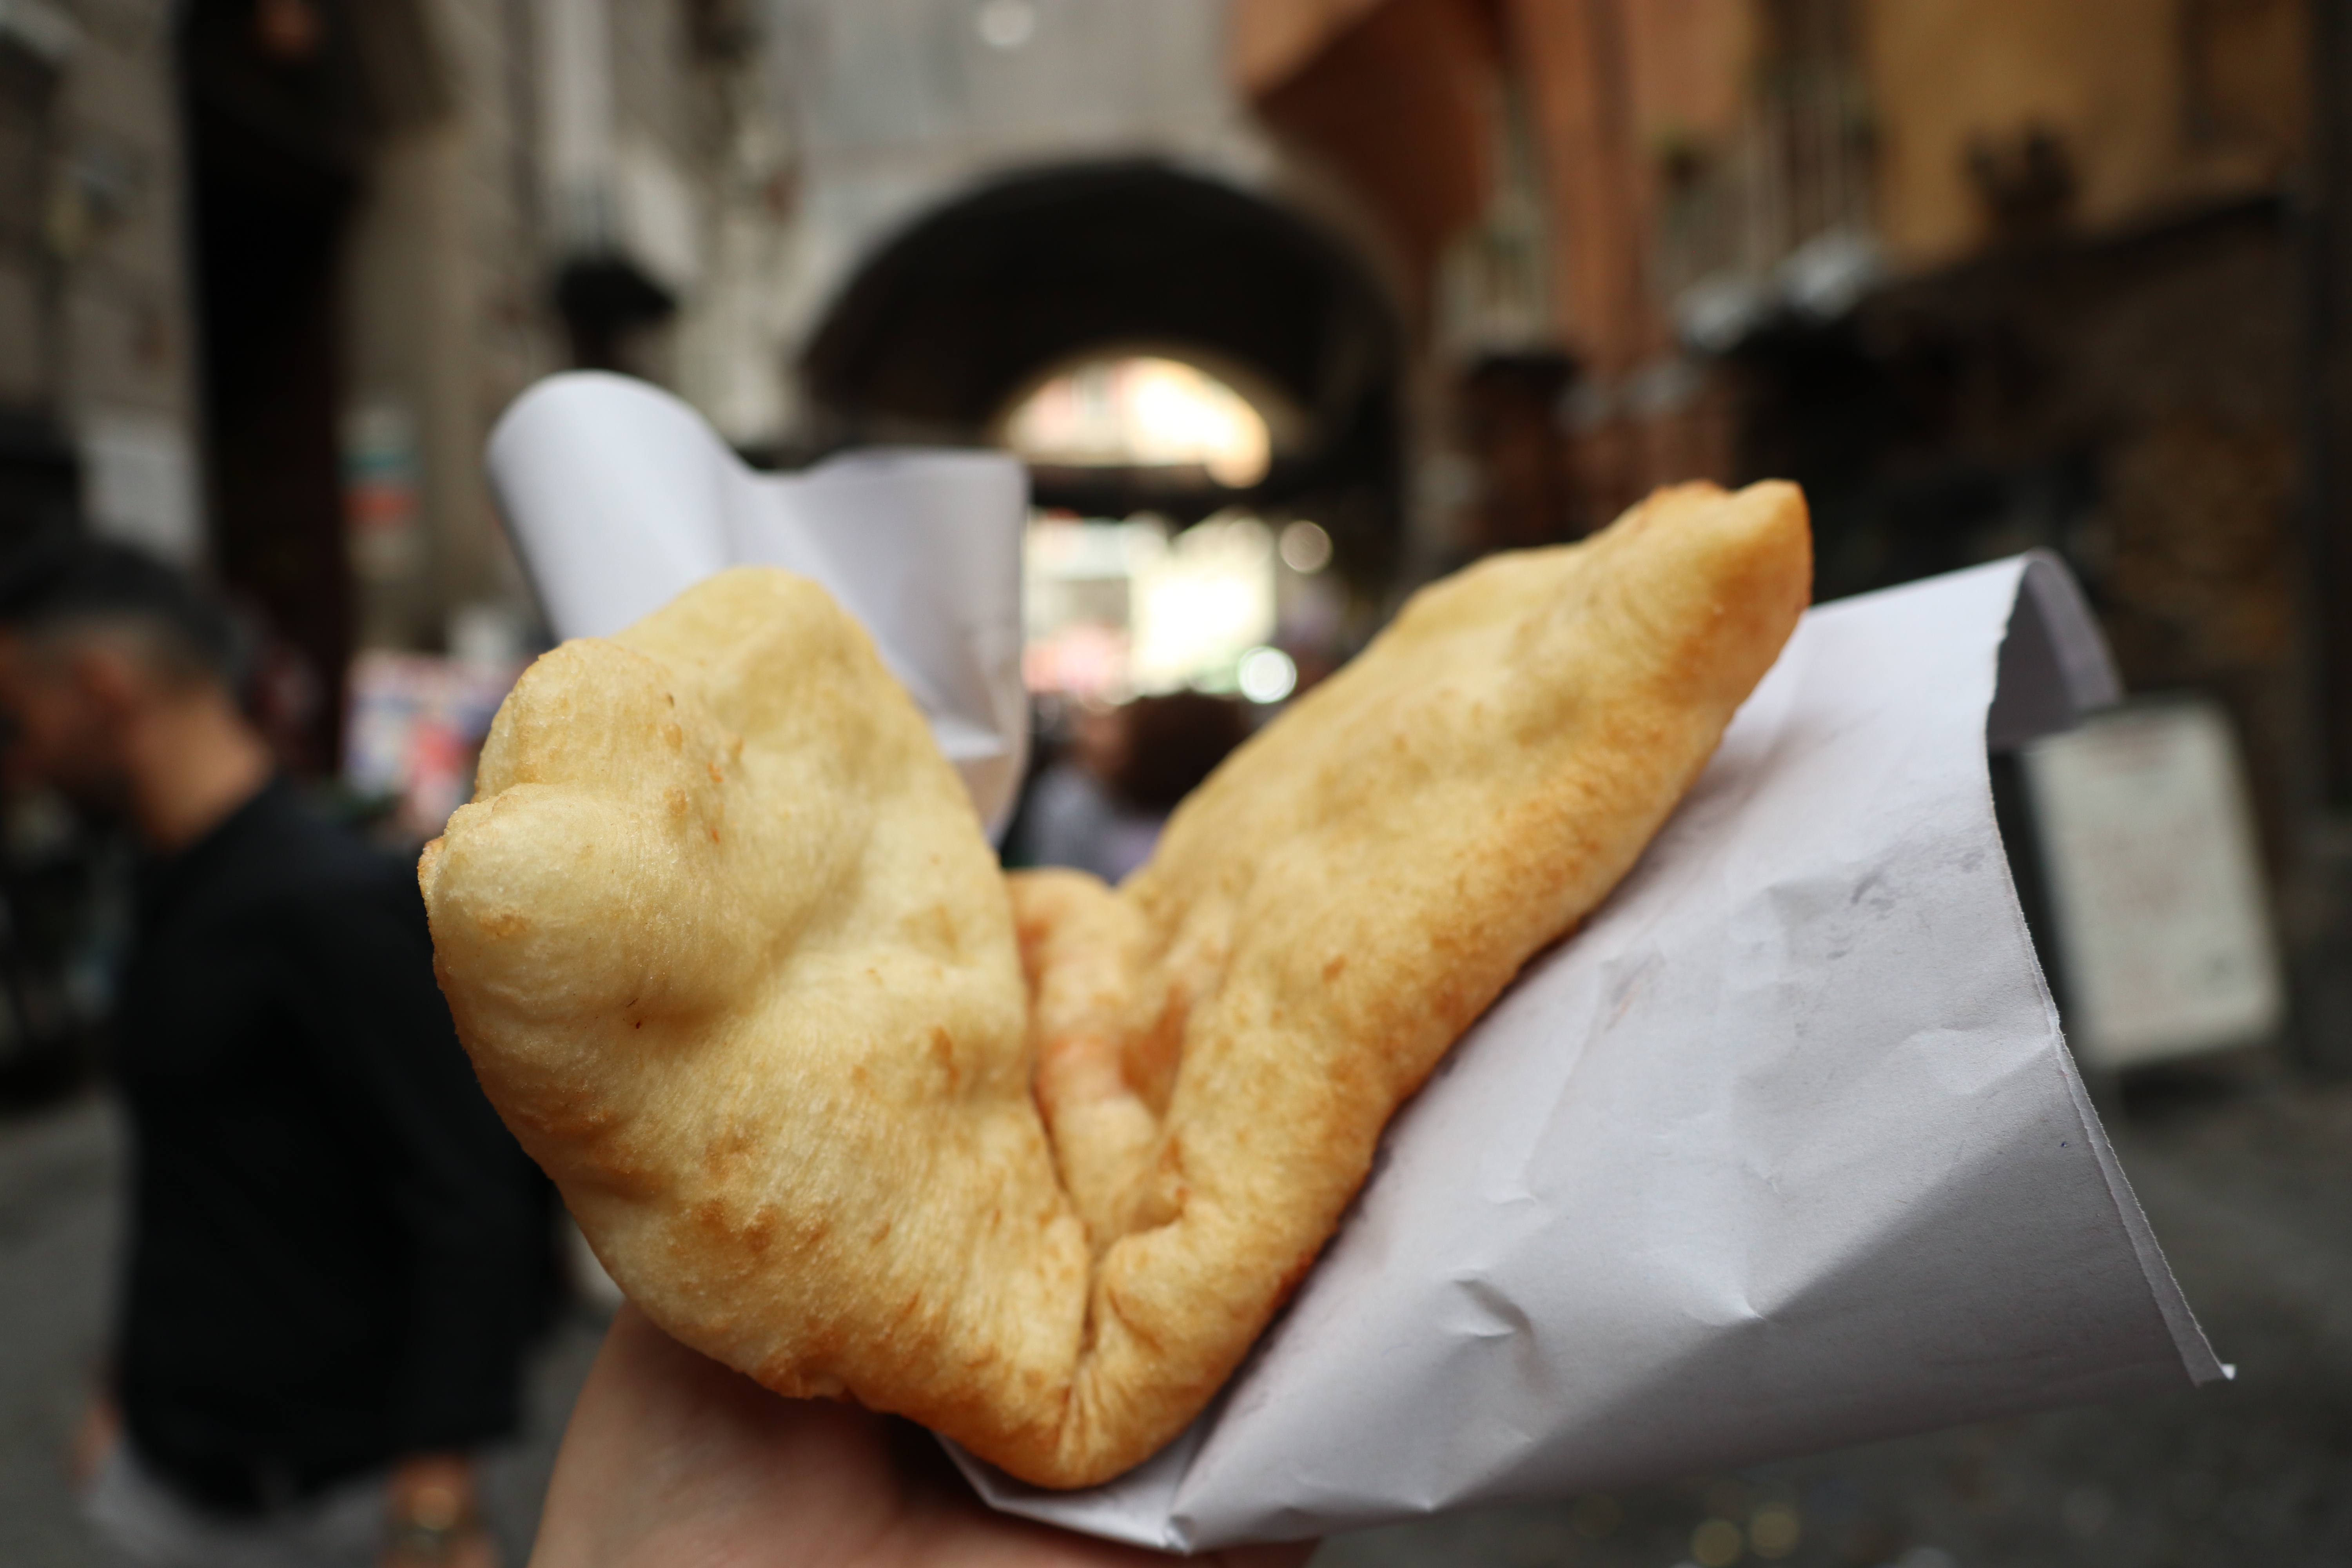 Fried pizza in Naples, Italy.